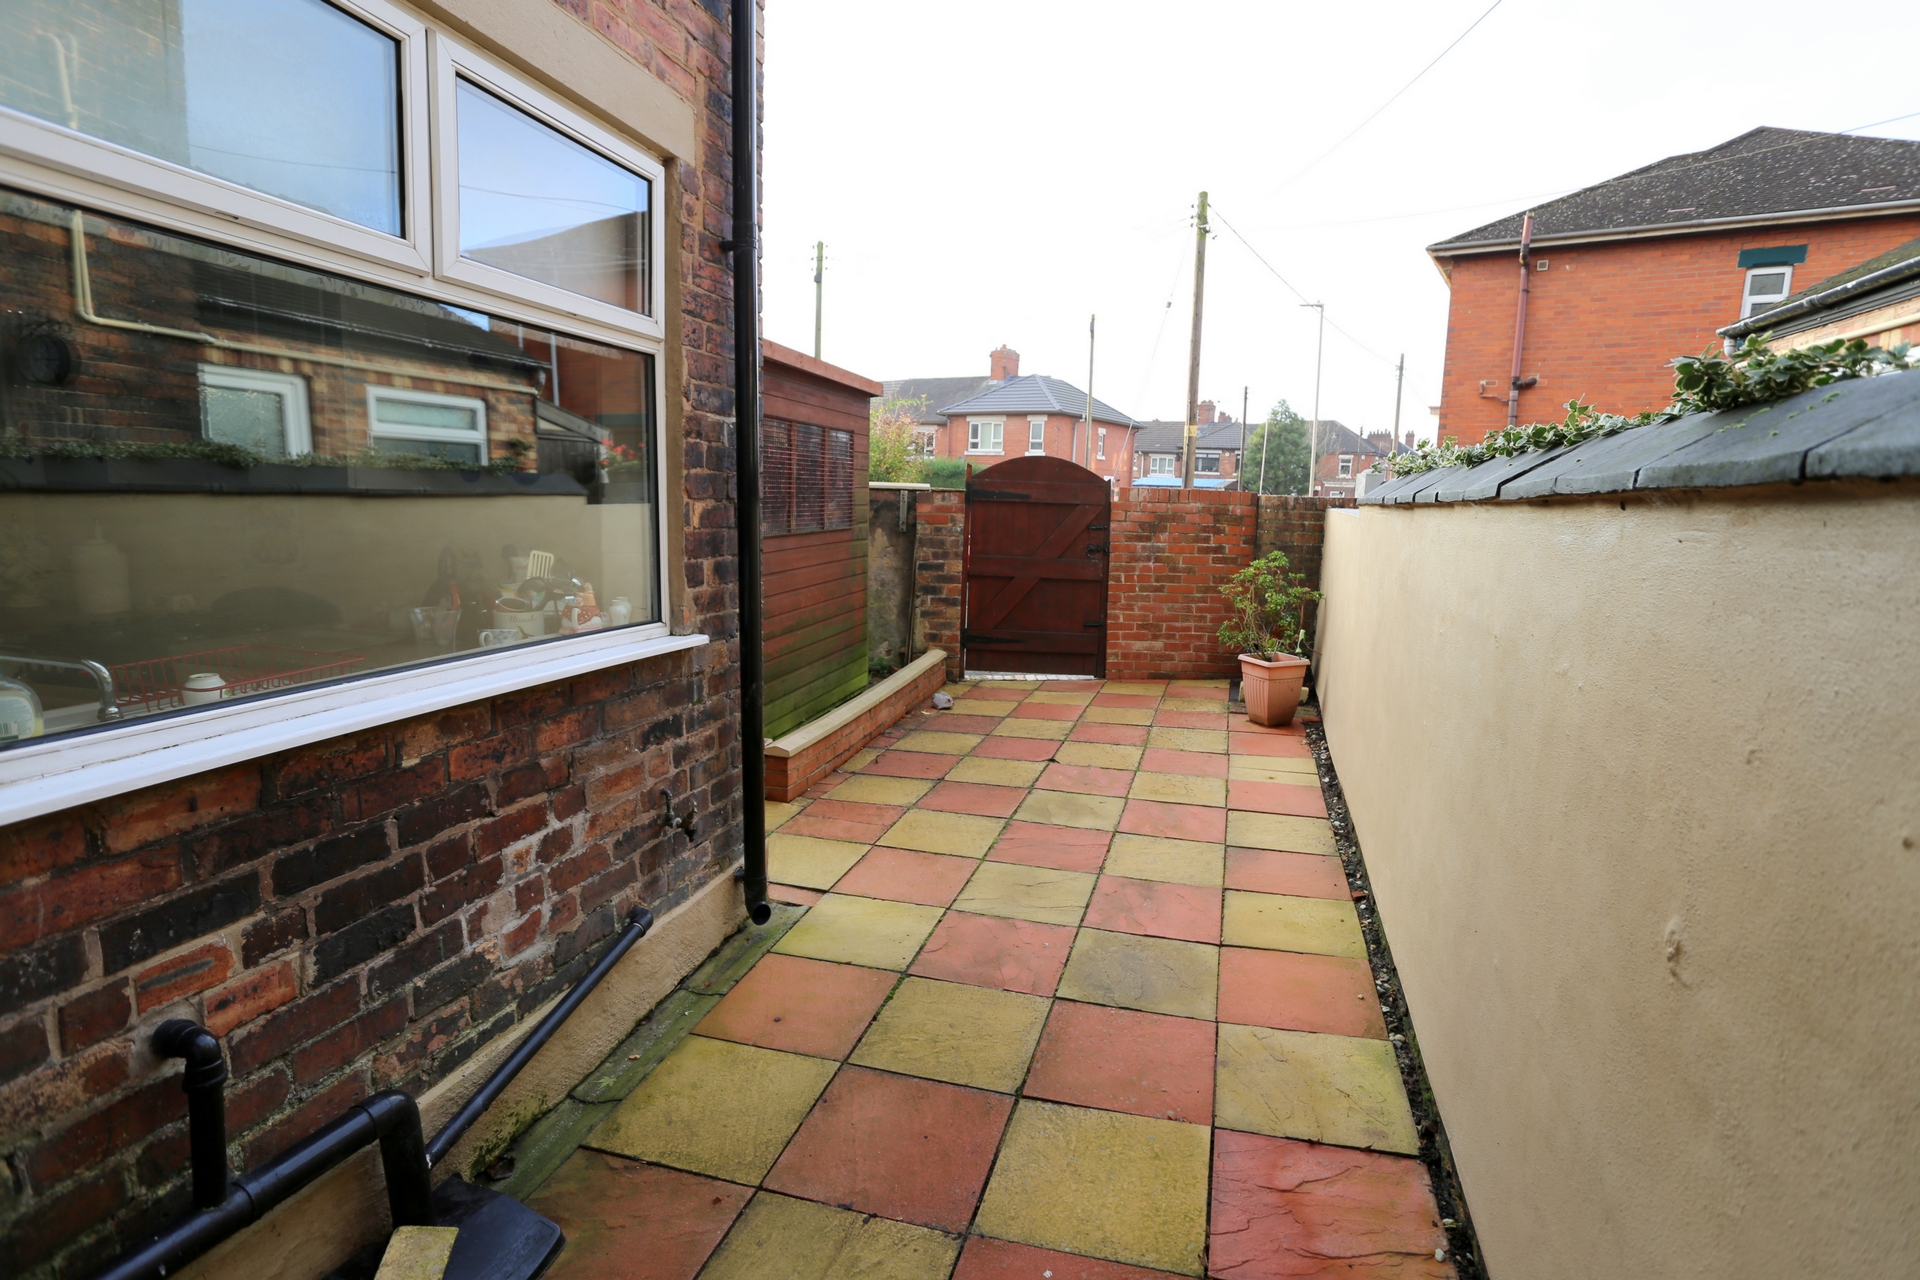 3 bedrooms terraced, 12a Cemetery View Longton Stoke on Trent Staffordshire